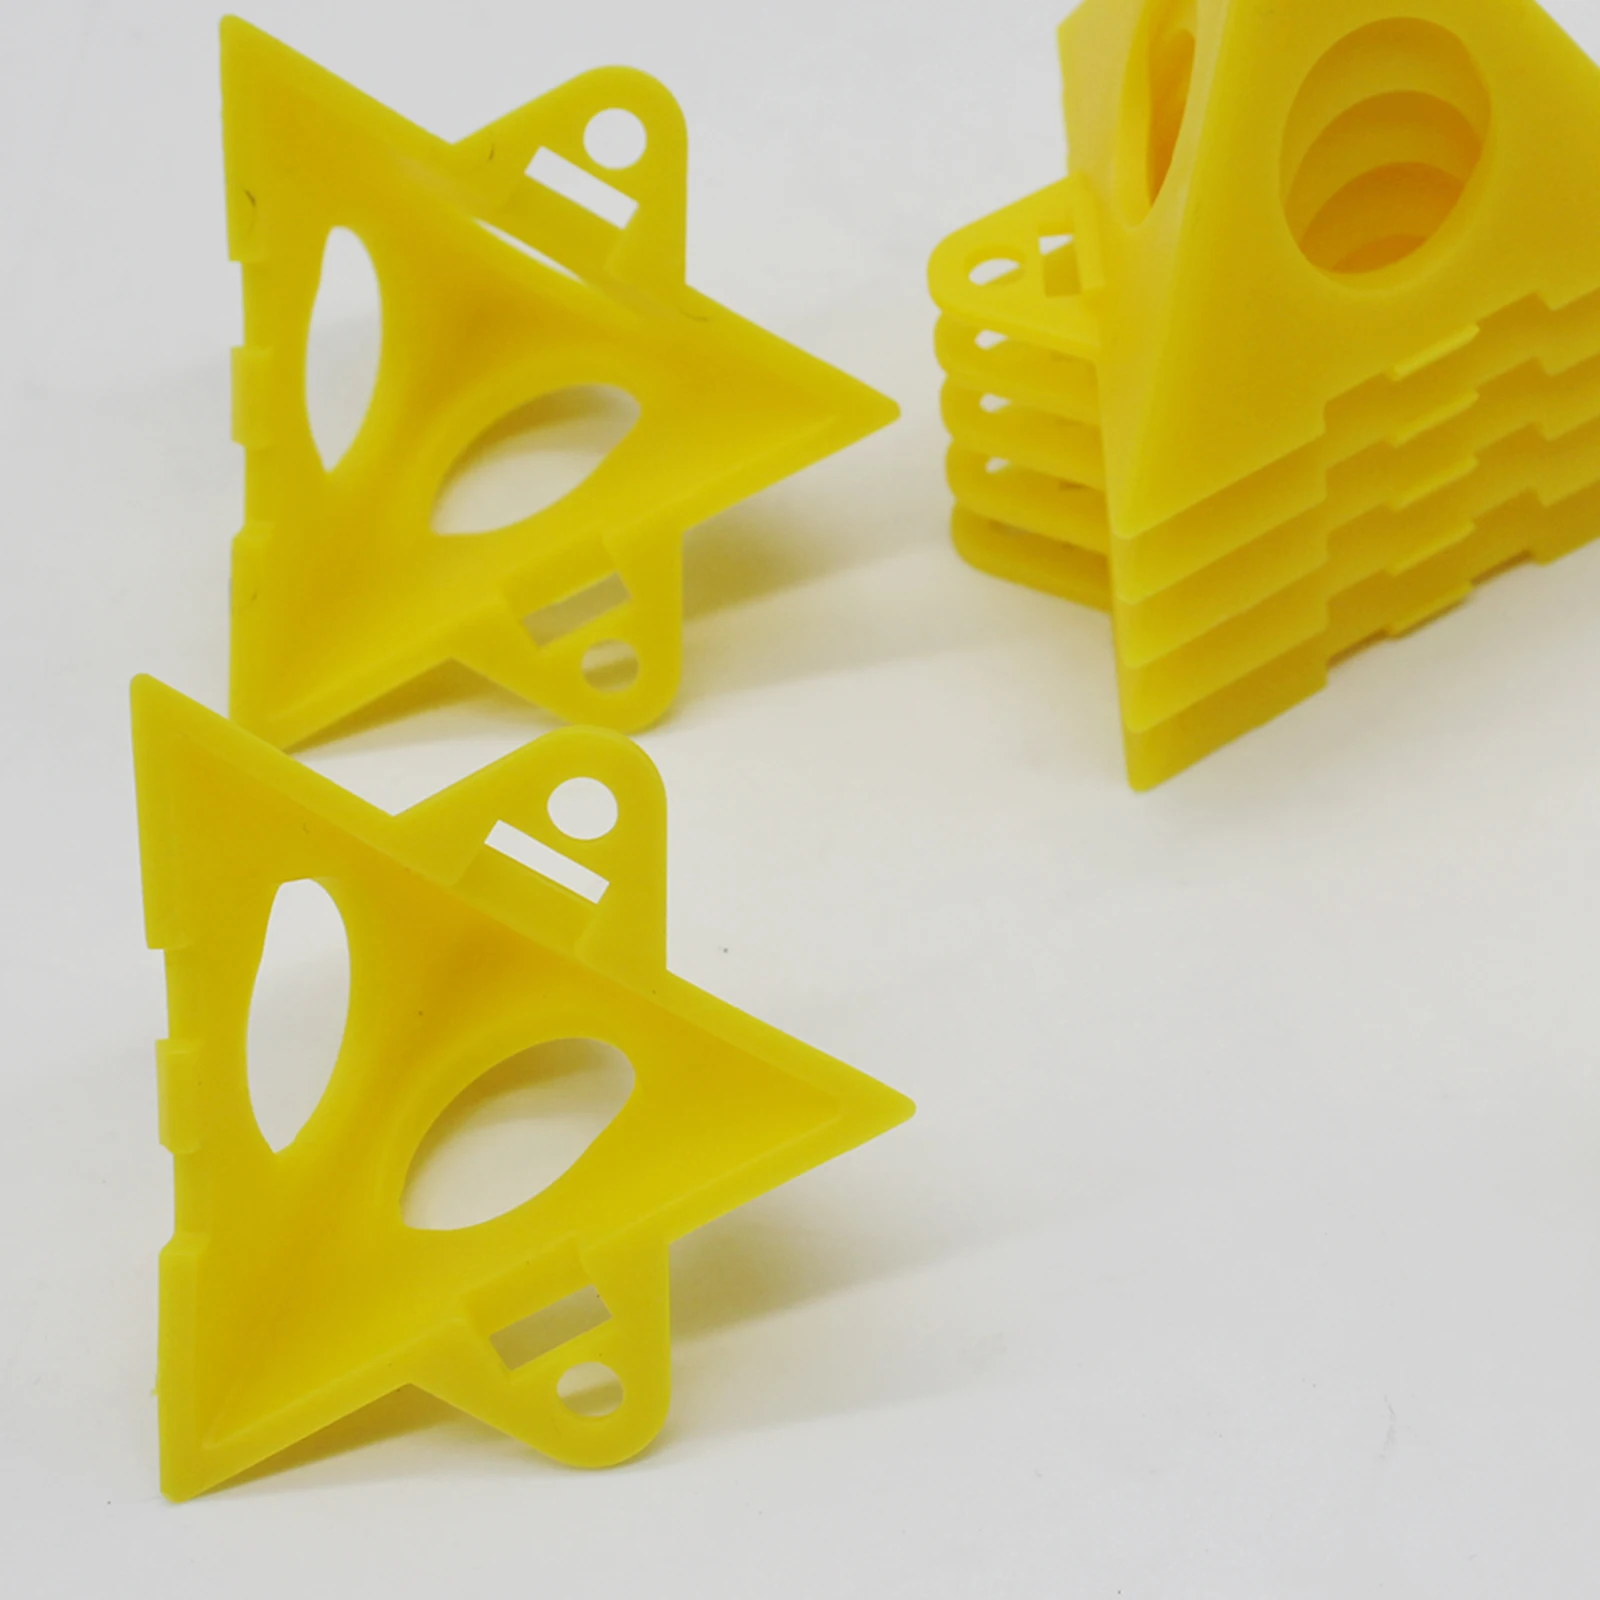 10 Pcs Cabinet Door Risers Acrylic Pouring Paint Canvas Support Stands Yellow, No Mess